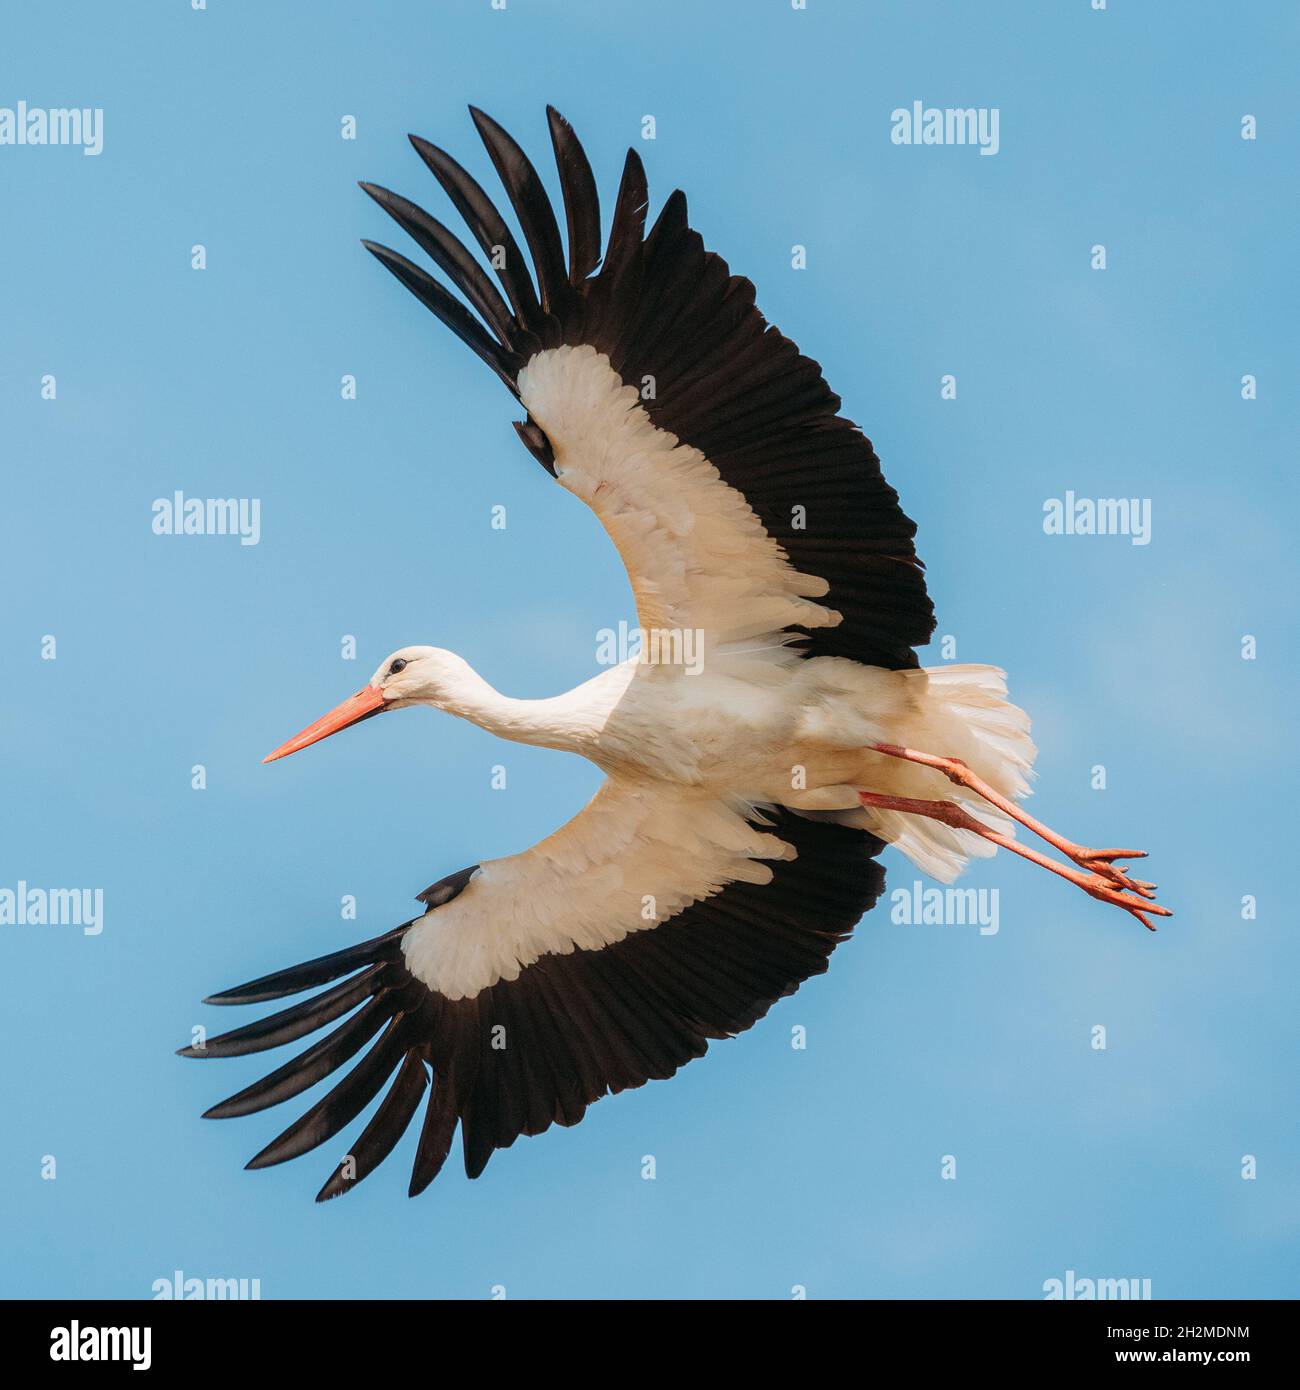 Adult European White Stork Flies In Blue Sky With Its Wings Spread Out Stock Photo